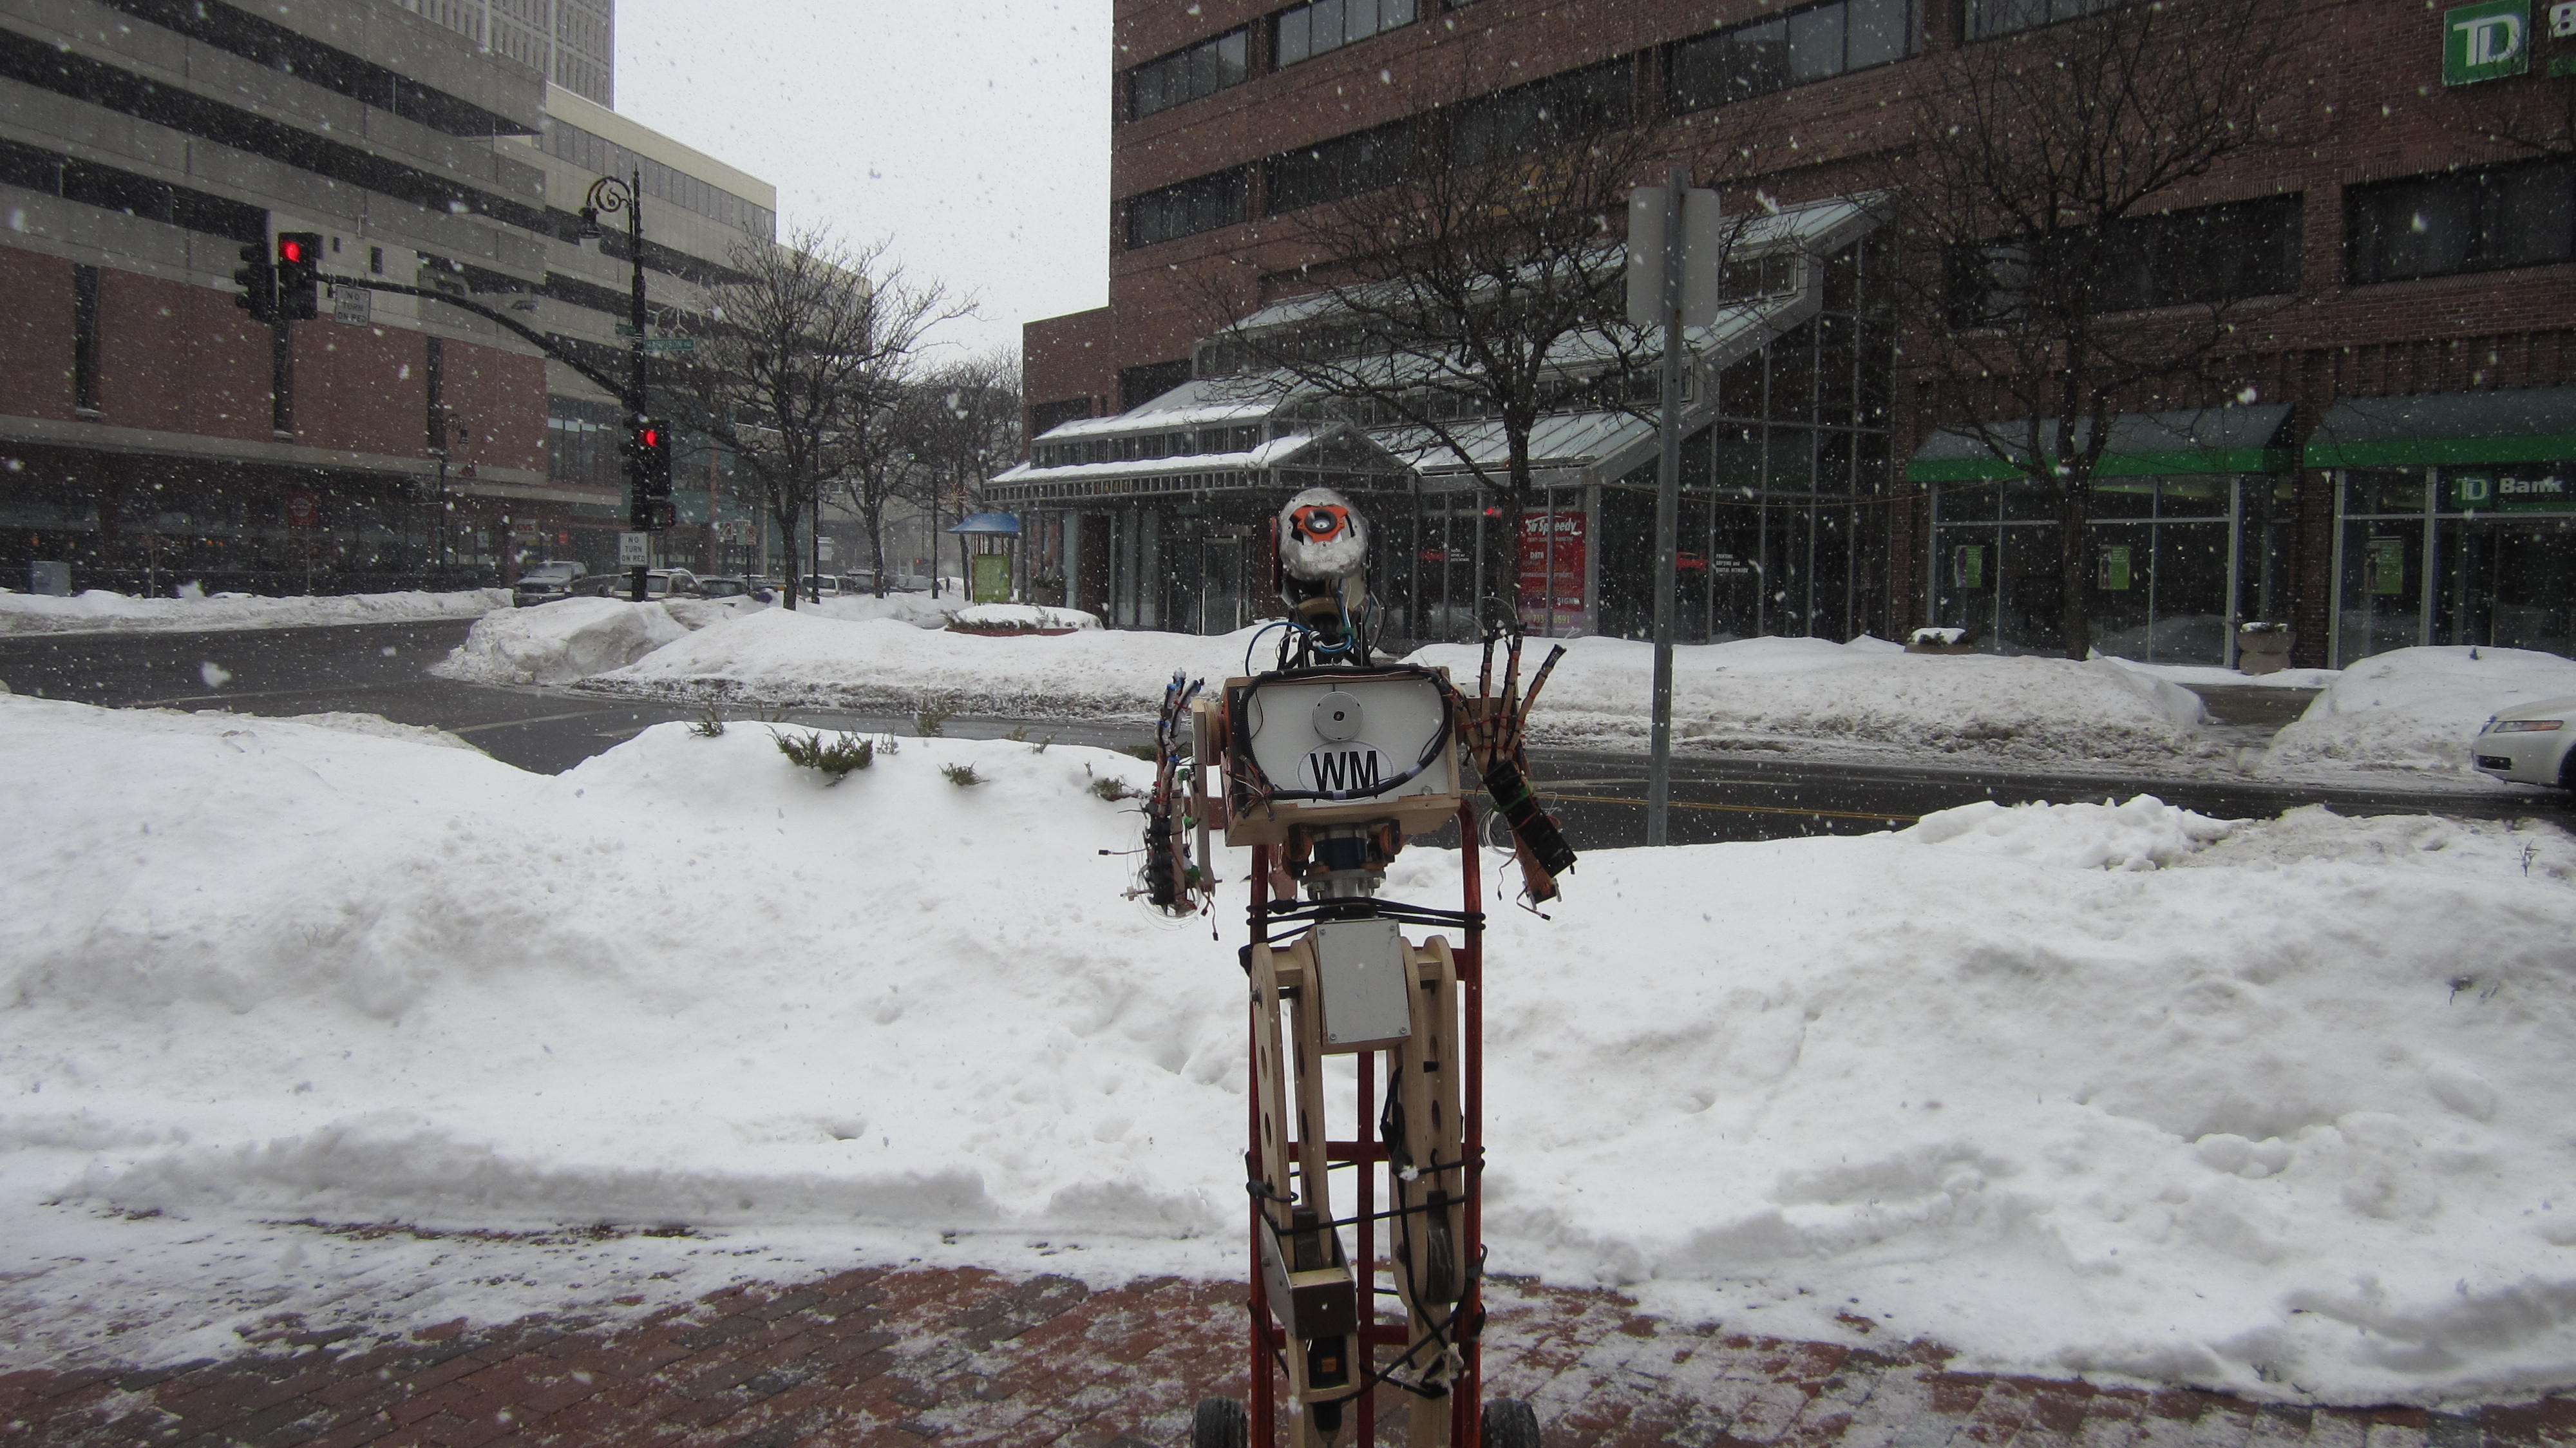 Robot standing in the snow